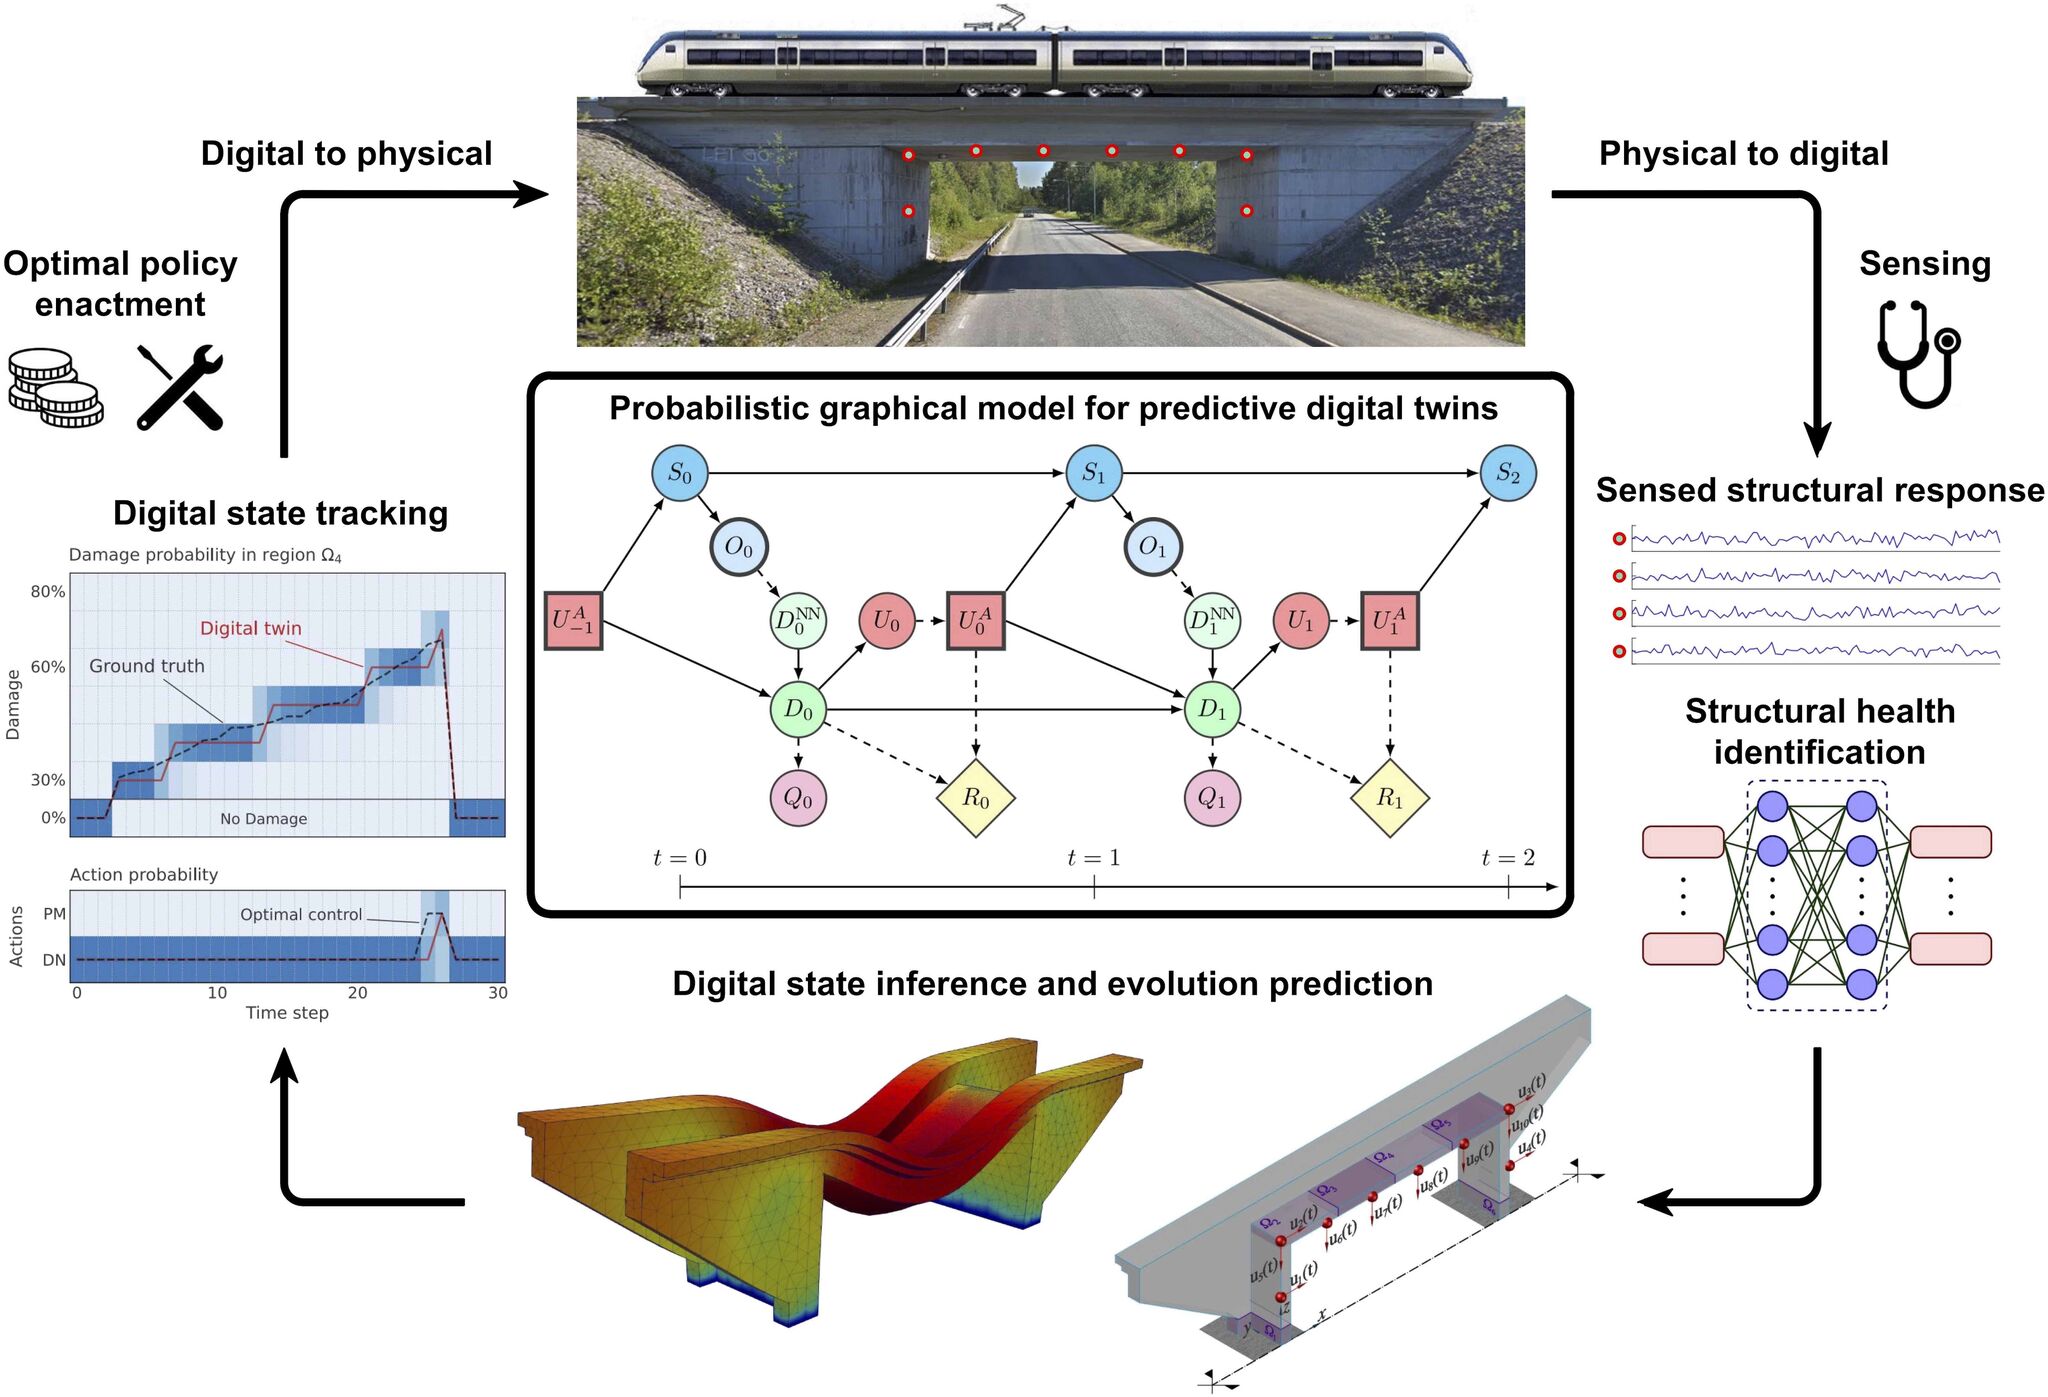 Using Digital Twins of Civil Engineering Structures, Researchers Predict and Respond to Operational Failures